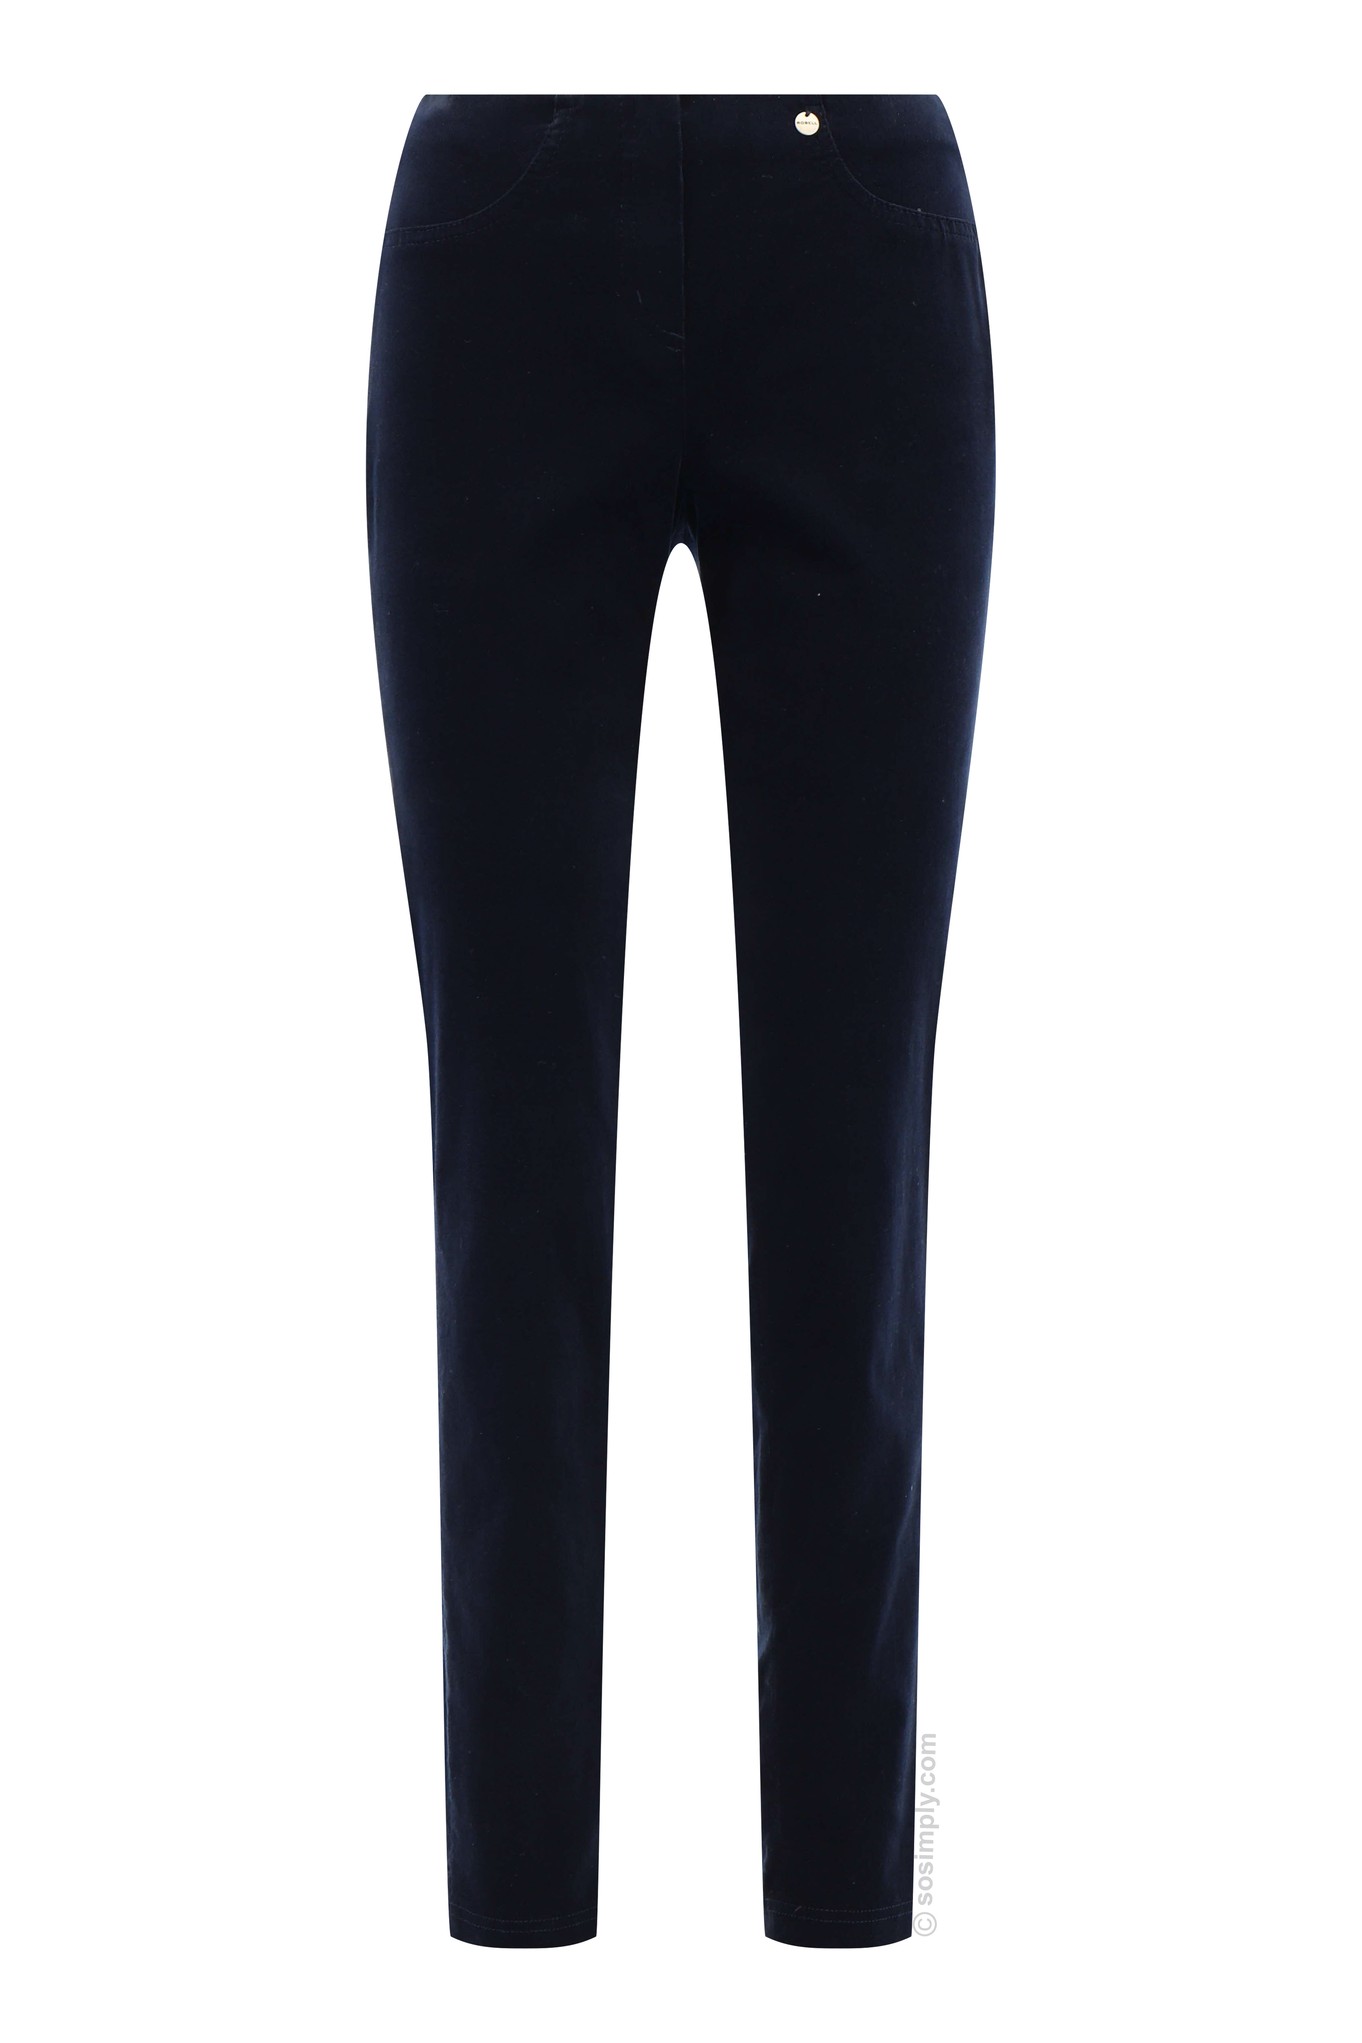 Robell Ladies Needlecord Trousers | So Simply